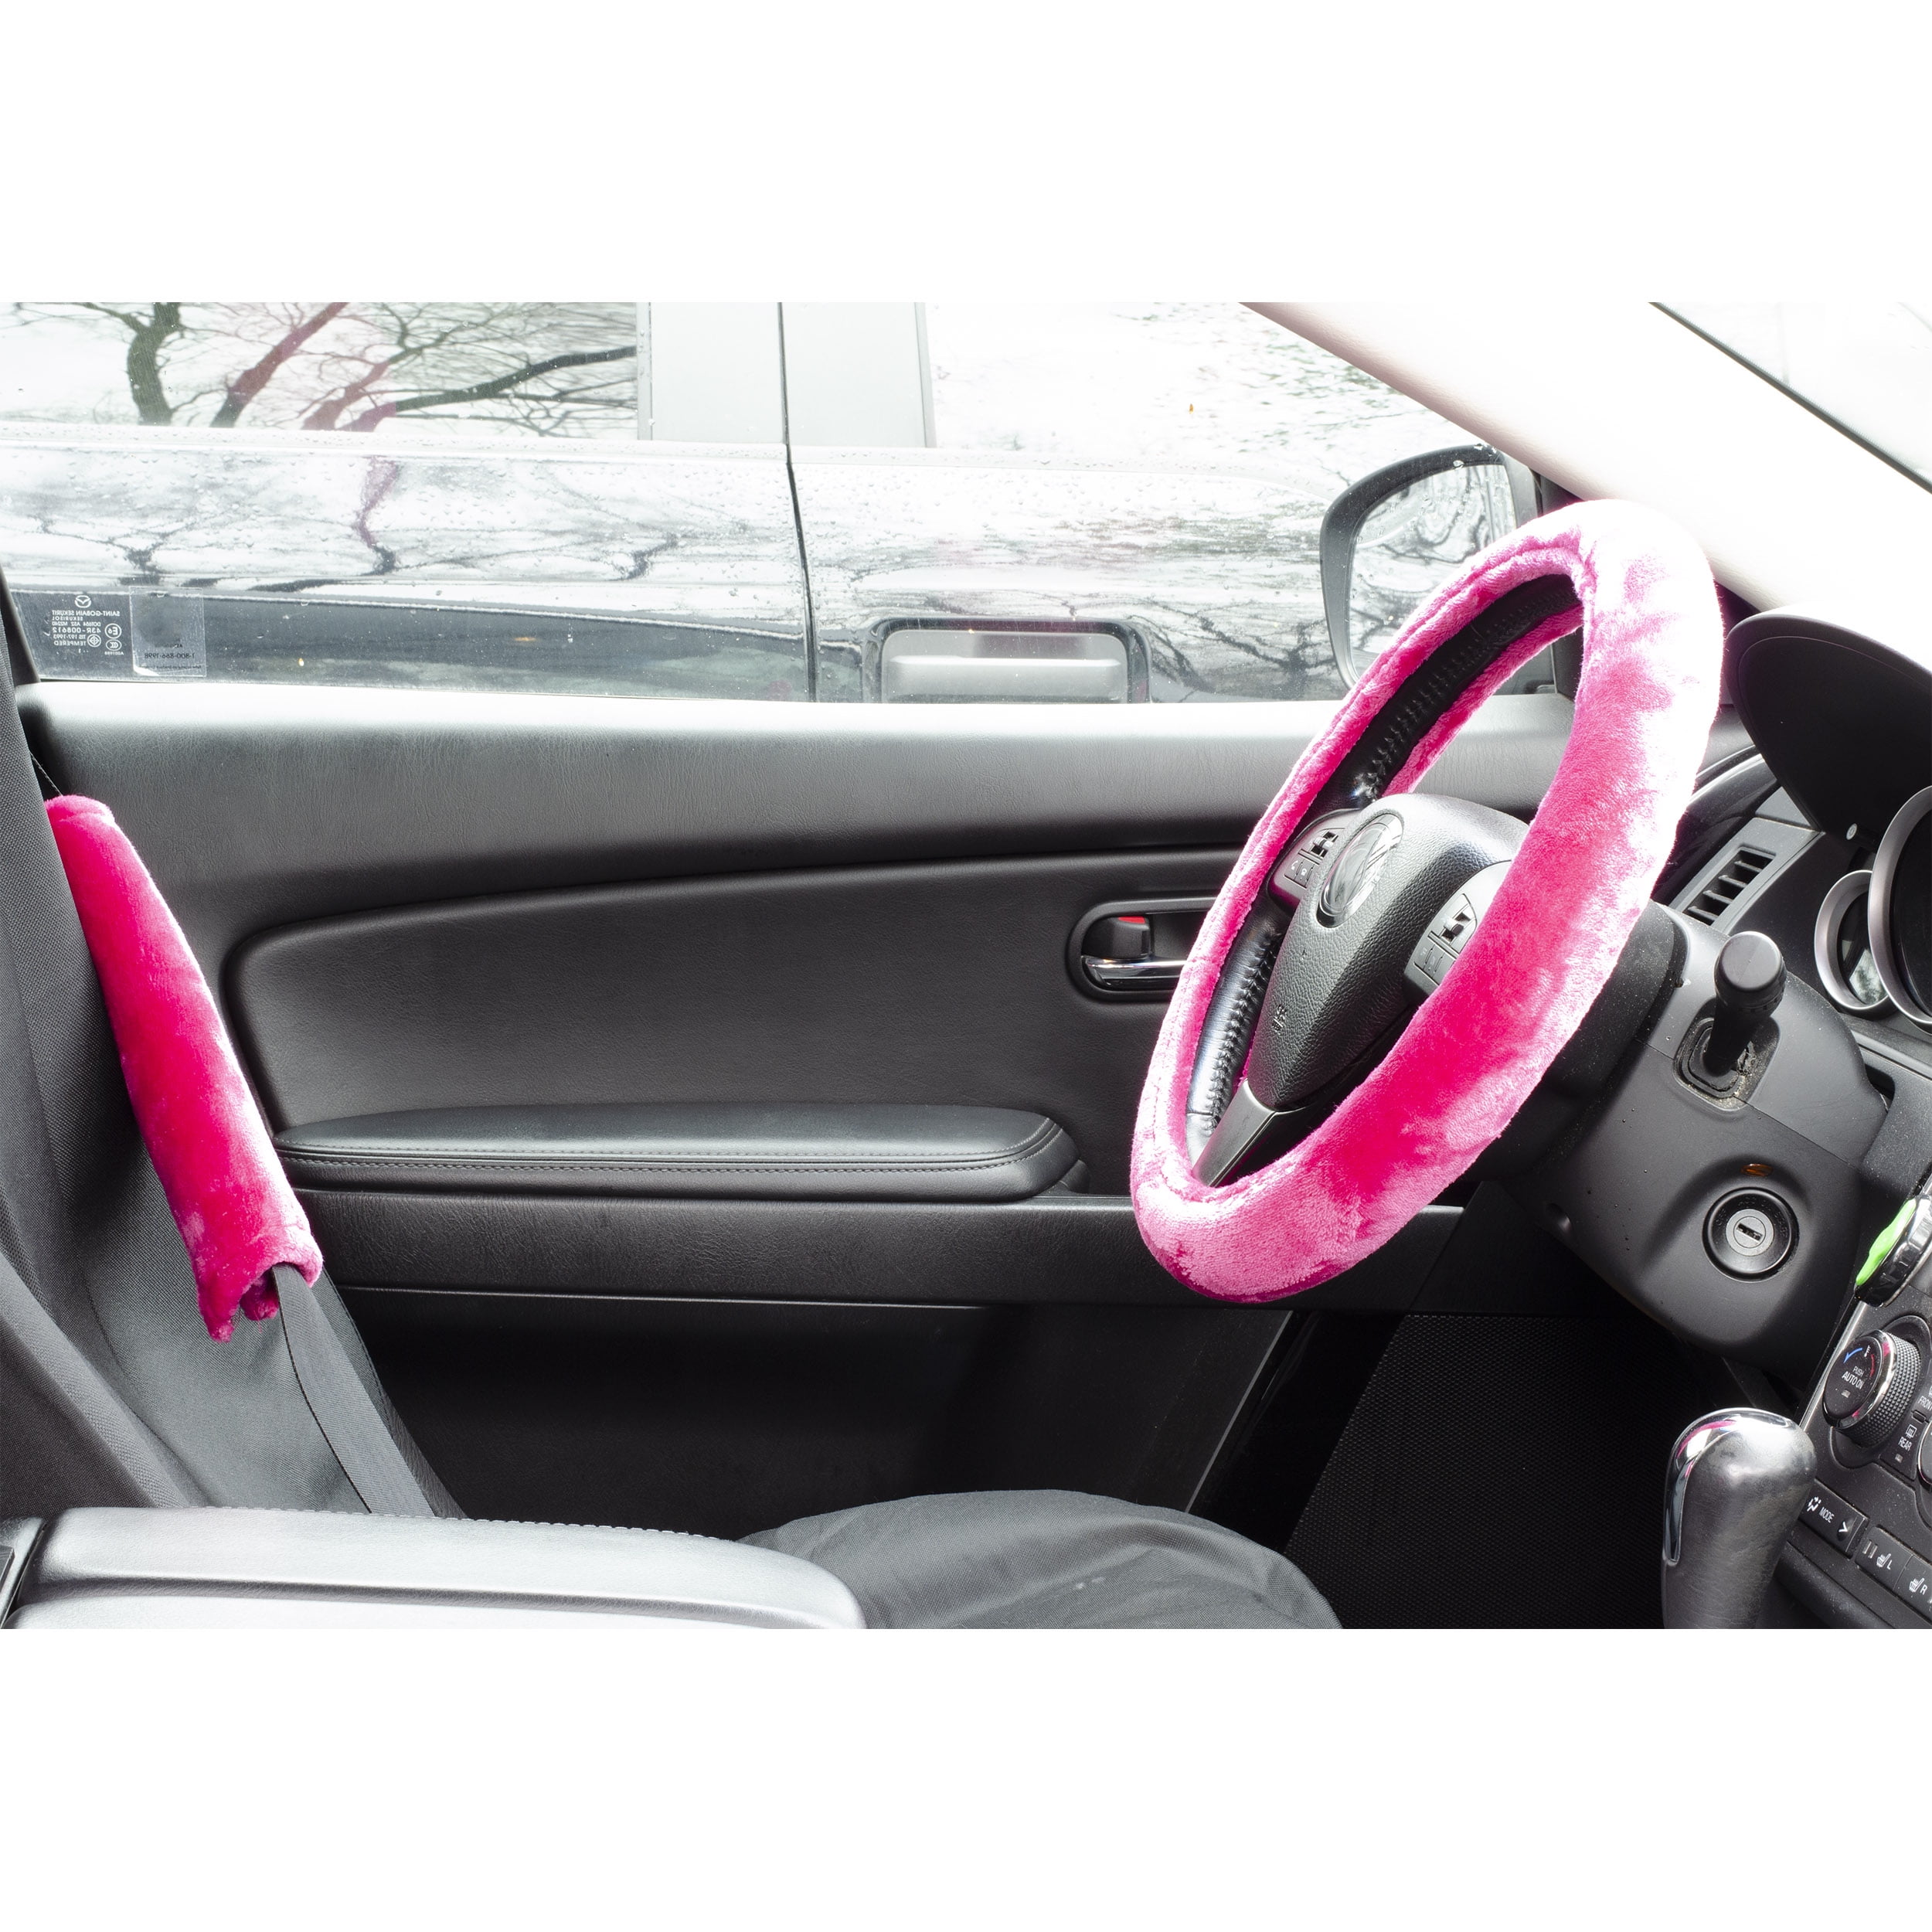 Pink Car Accessories Set Car Seat Covers Full Set Steering Wheel Cover  Headrest Cover with Center Console Pad Cup Cup Holders Seat Belt Pads Gear